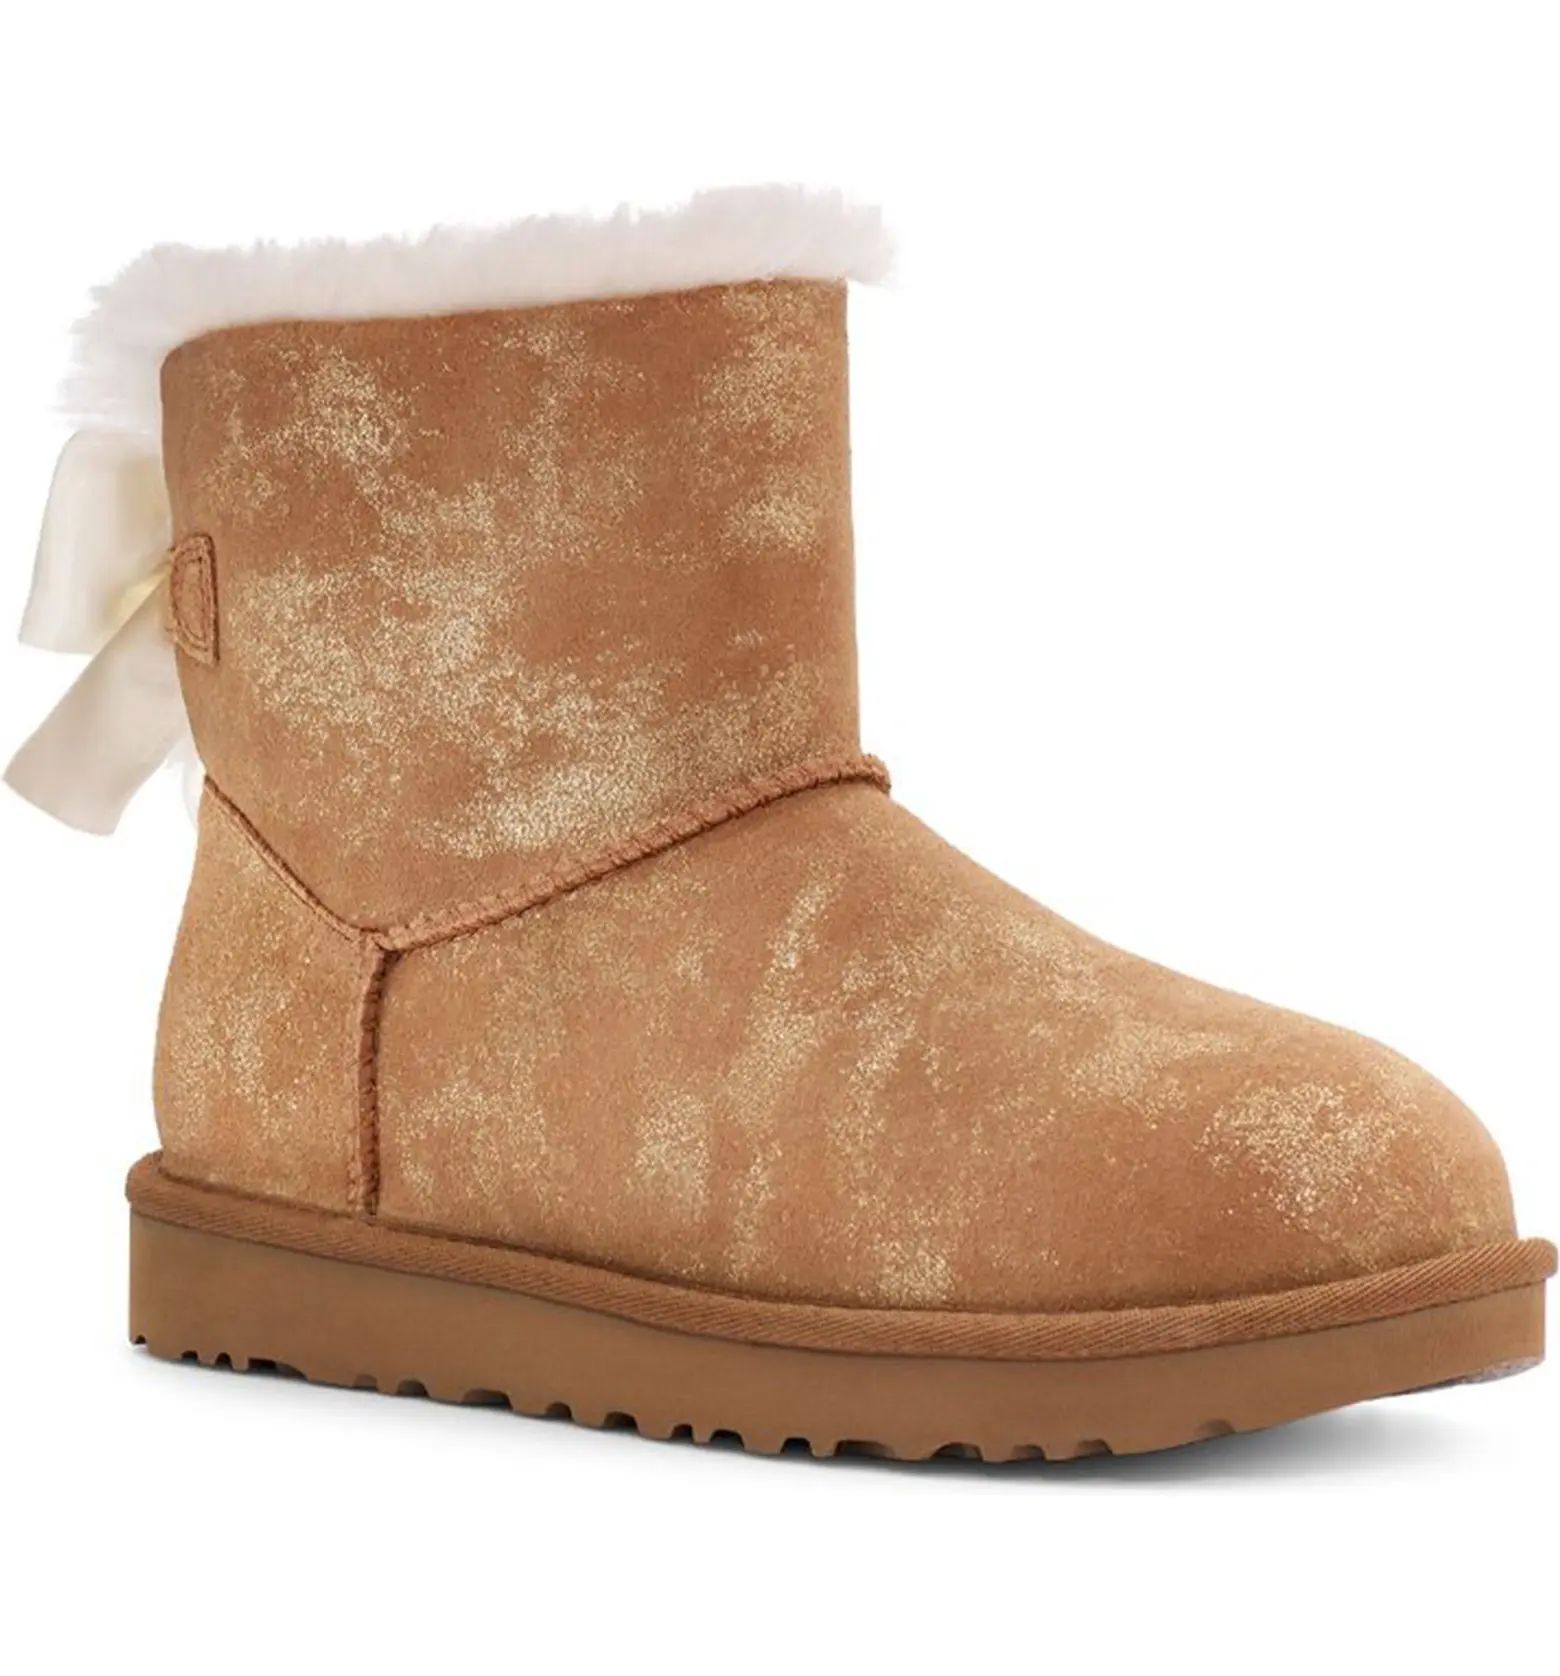 Mini Bailey Bow Glimmer Faux Fur Lined Boot (Women) | Nordstrom Rack